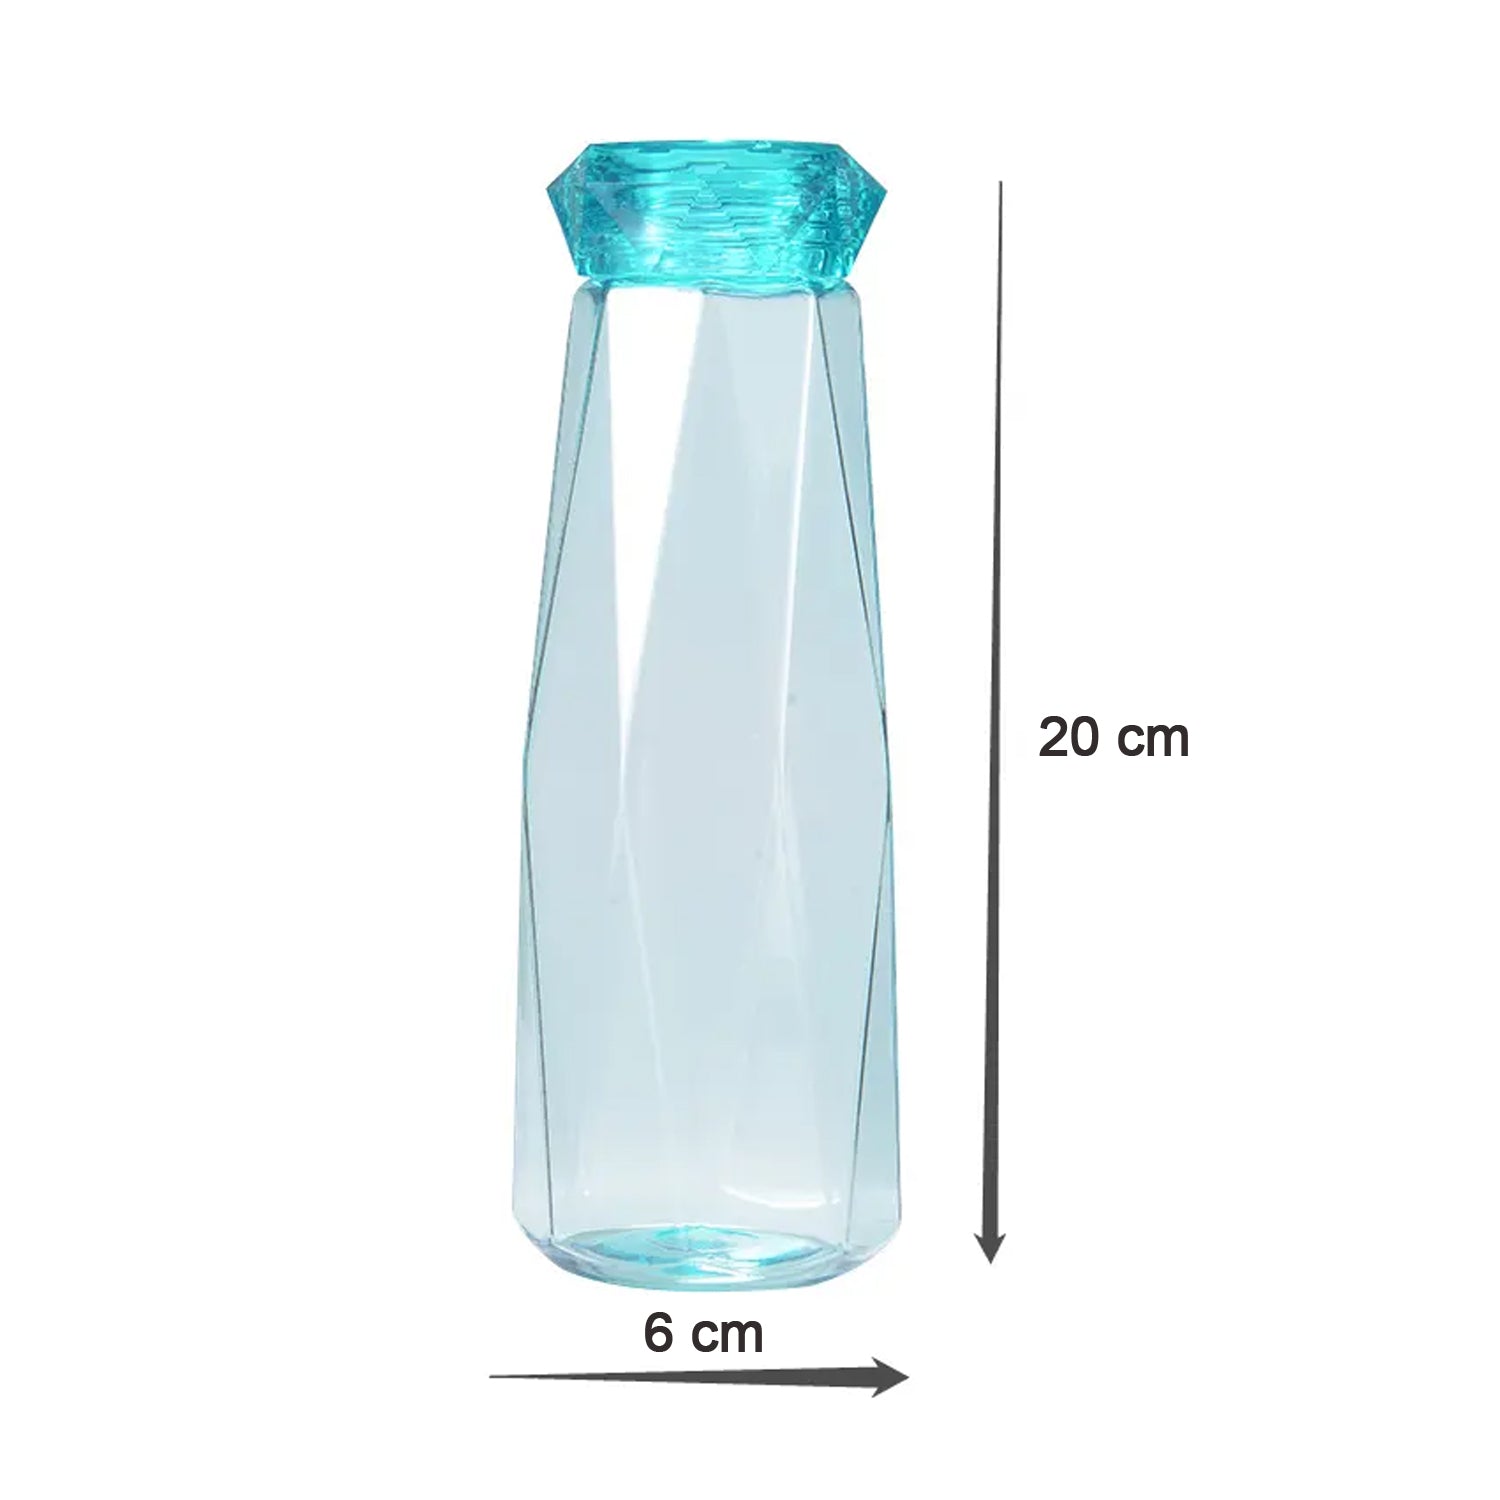 5213 Glass Fridge Water Bottle Plastic Cap With Two Water Glass For Home & Kitchen Use Dukandaily